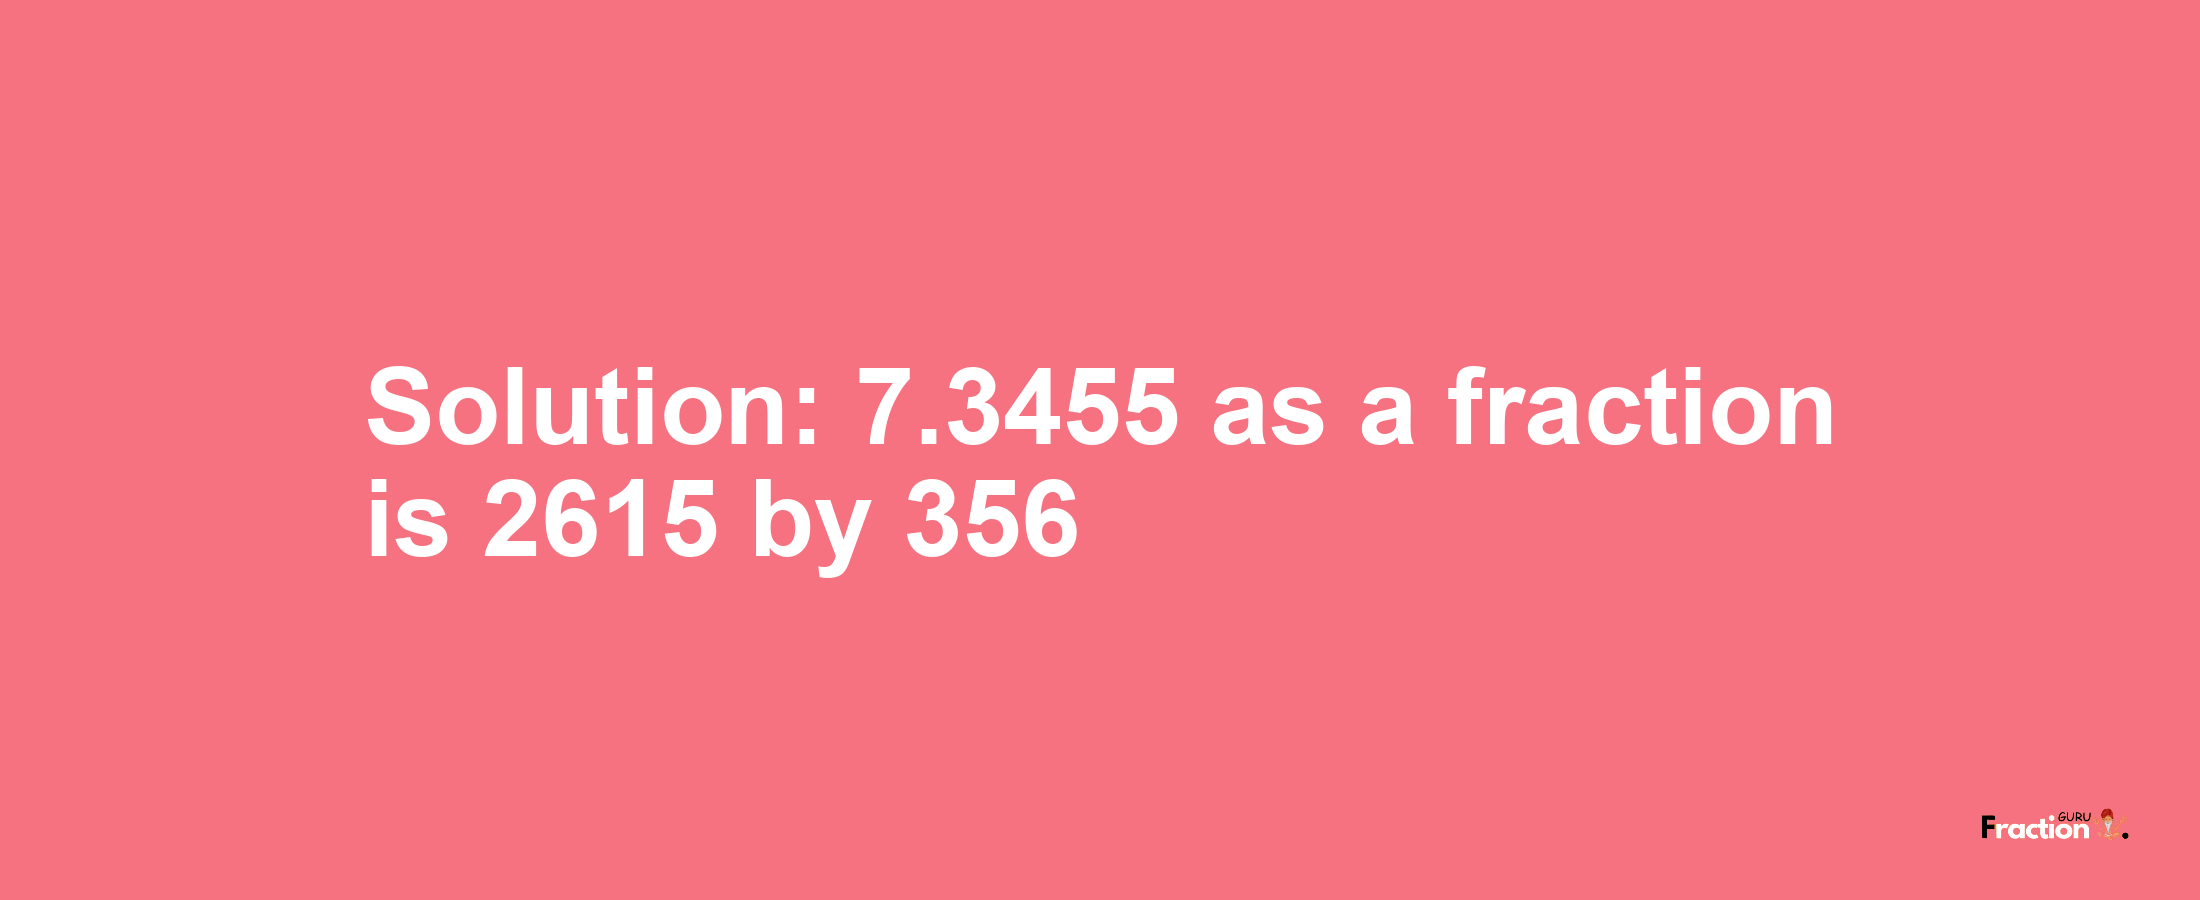 Solution:7.3455 as a fraction is 2615/356